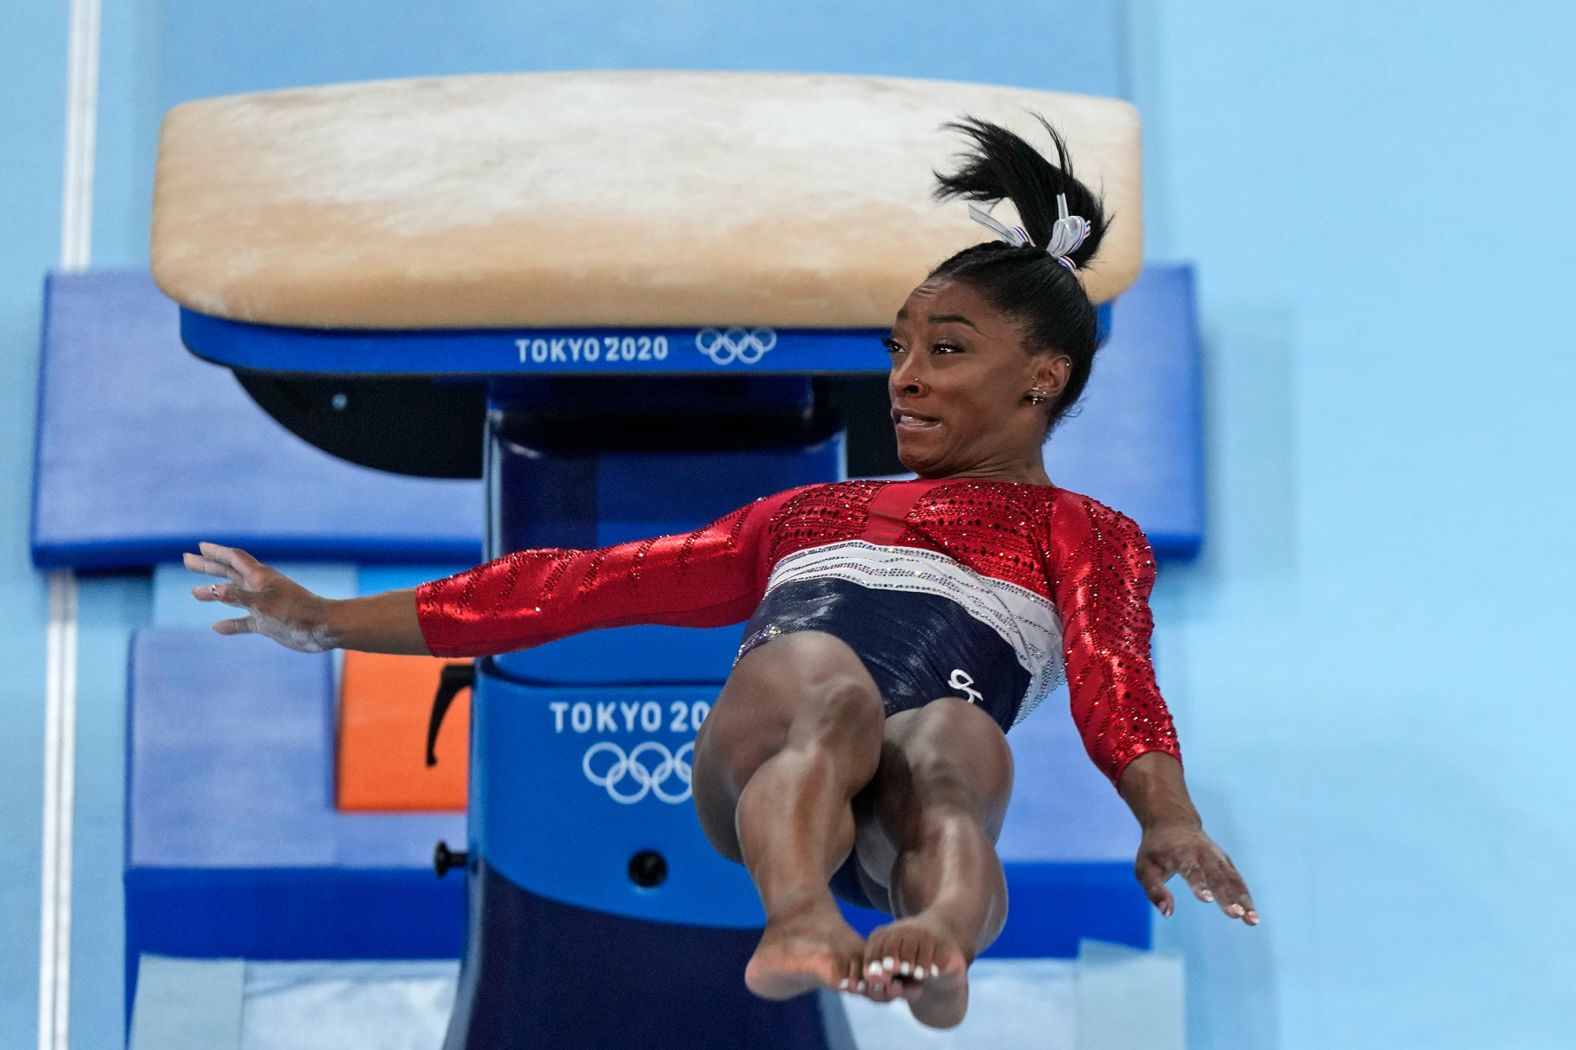 US gymnast Simone Biles performs on the vault during the team all-around event on July 27. She stumbled on the landing and <a href="index.php?page=&url=https%3A%2F%2Fwww.cnn.com%2F2021%2F07%2F27%2Fsport%2Fsimone-biles-tokyo-2020-olympics%2Findex.html" target="_blank">withdrew right after that,</a> saying she wasn't in the right frame of mind to compete. "It just sucks when you're fighting with your own head," she told reporters.